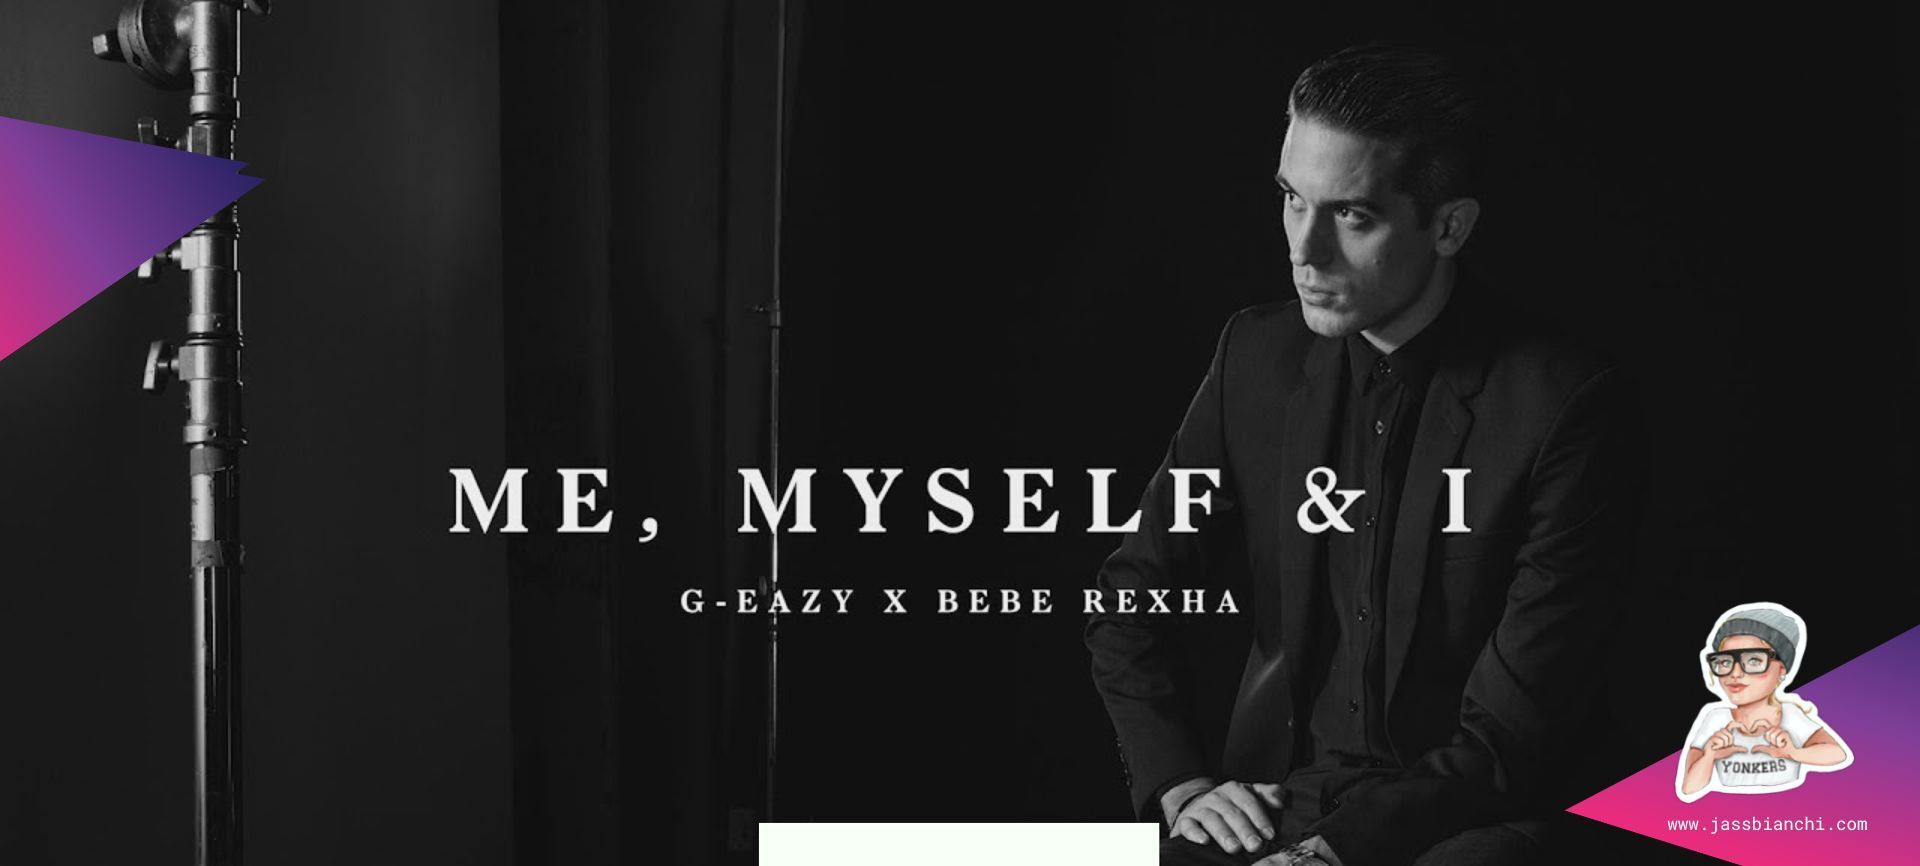 "How 'Me, Myself and I' by G-Eazy and Bebe Rexha Speaks to Introverts Everywhere"